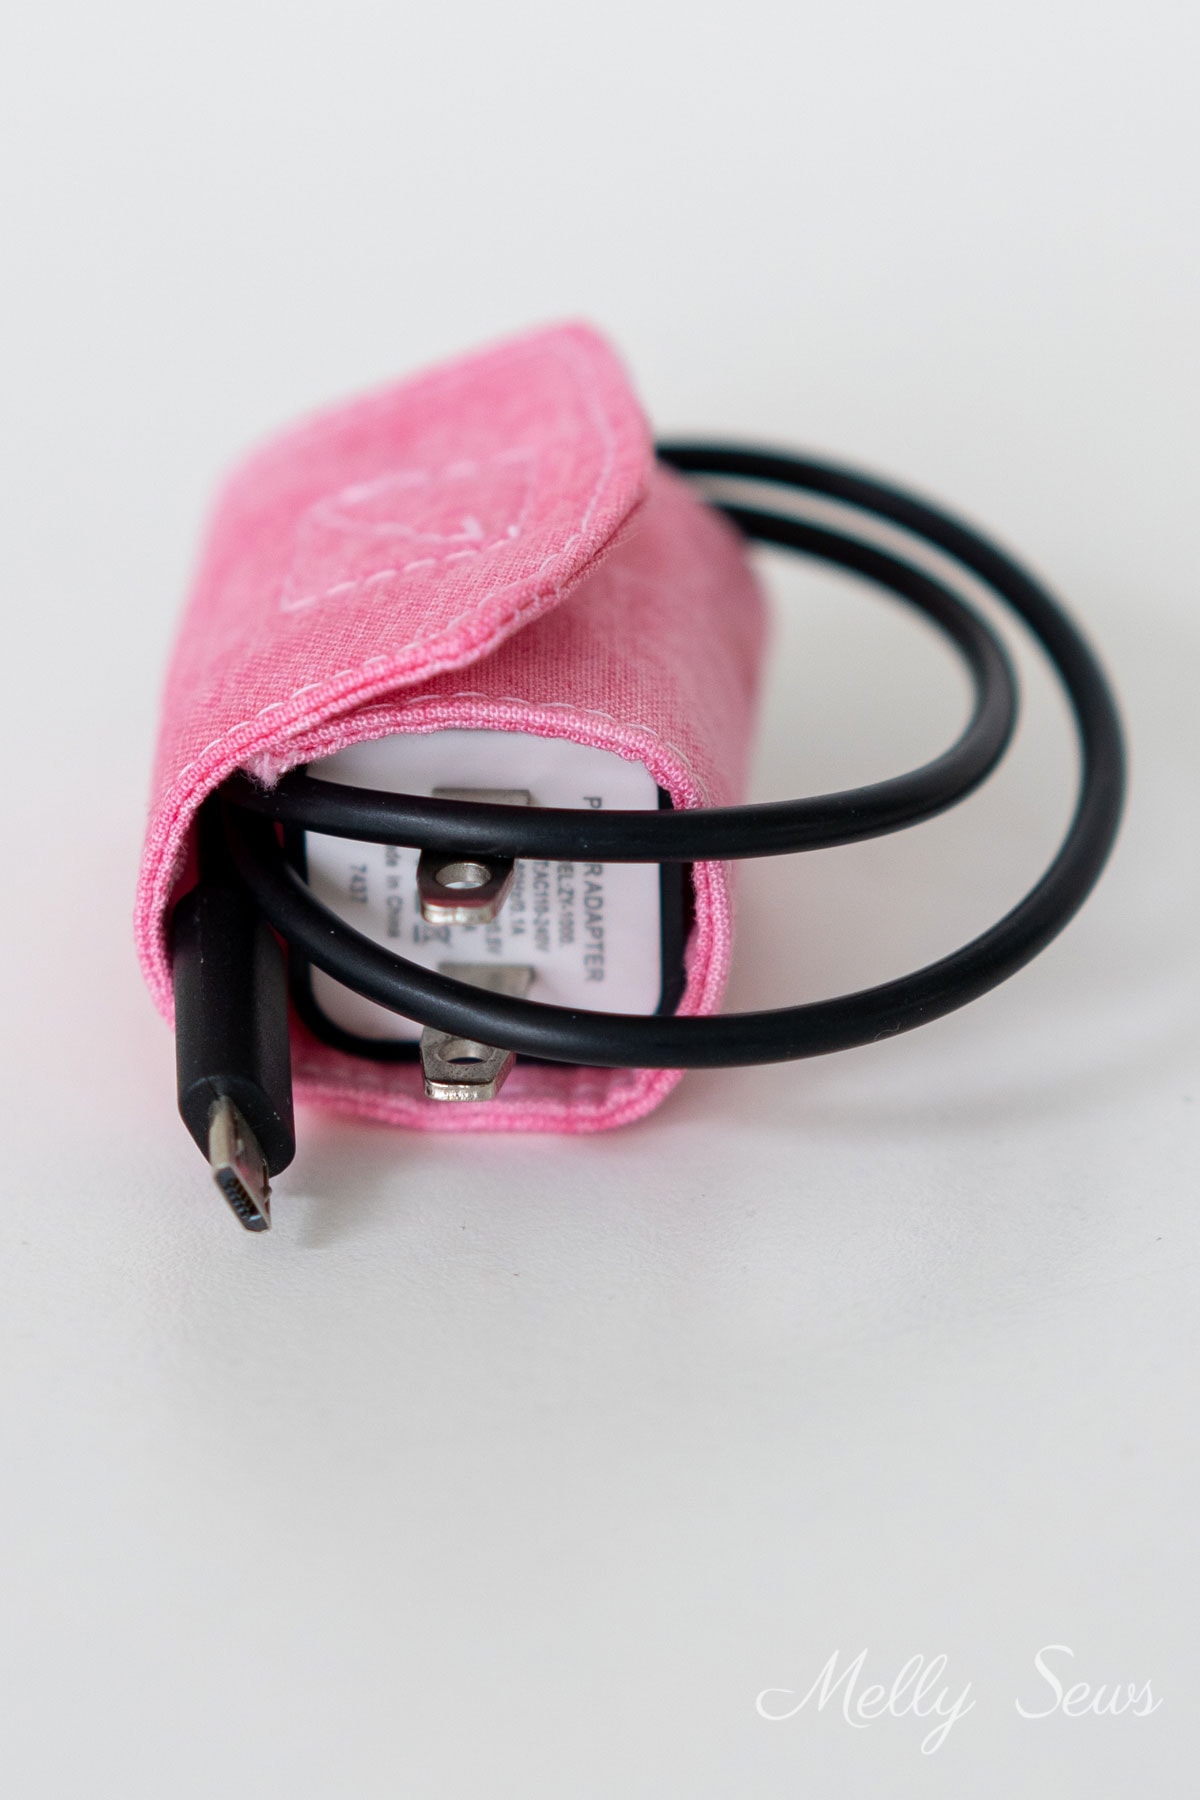 Pink cord keeper wrapped around a charger cord and brick